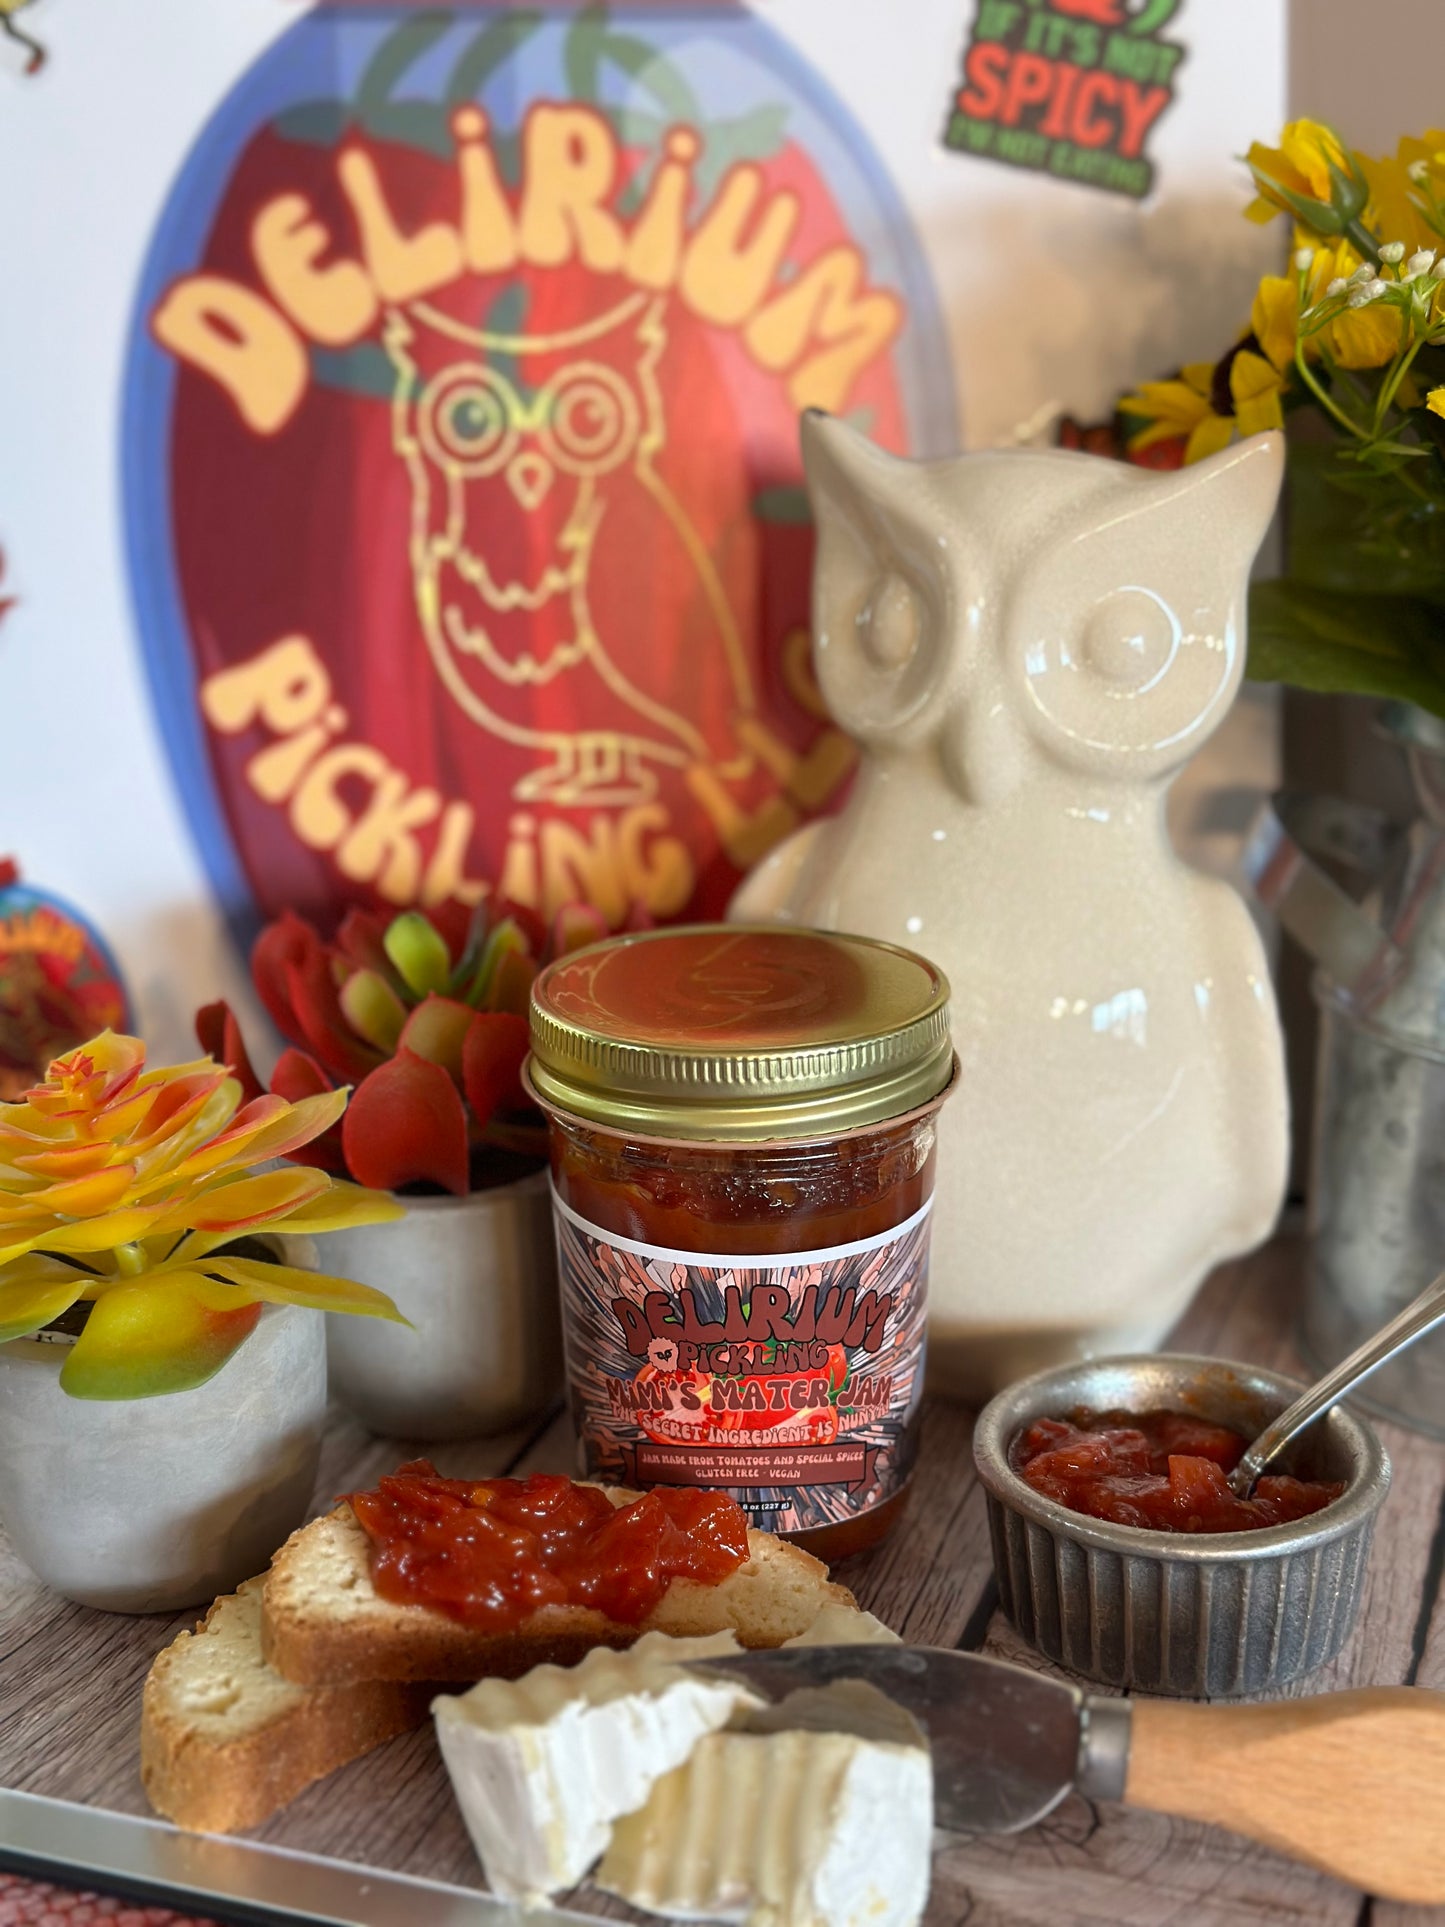 Mimi’s Mater Jam (Jam Made from Tomatoes & Special Spices)